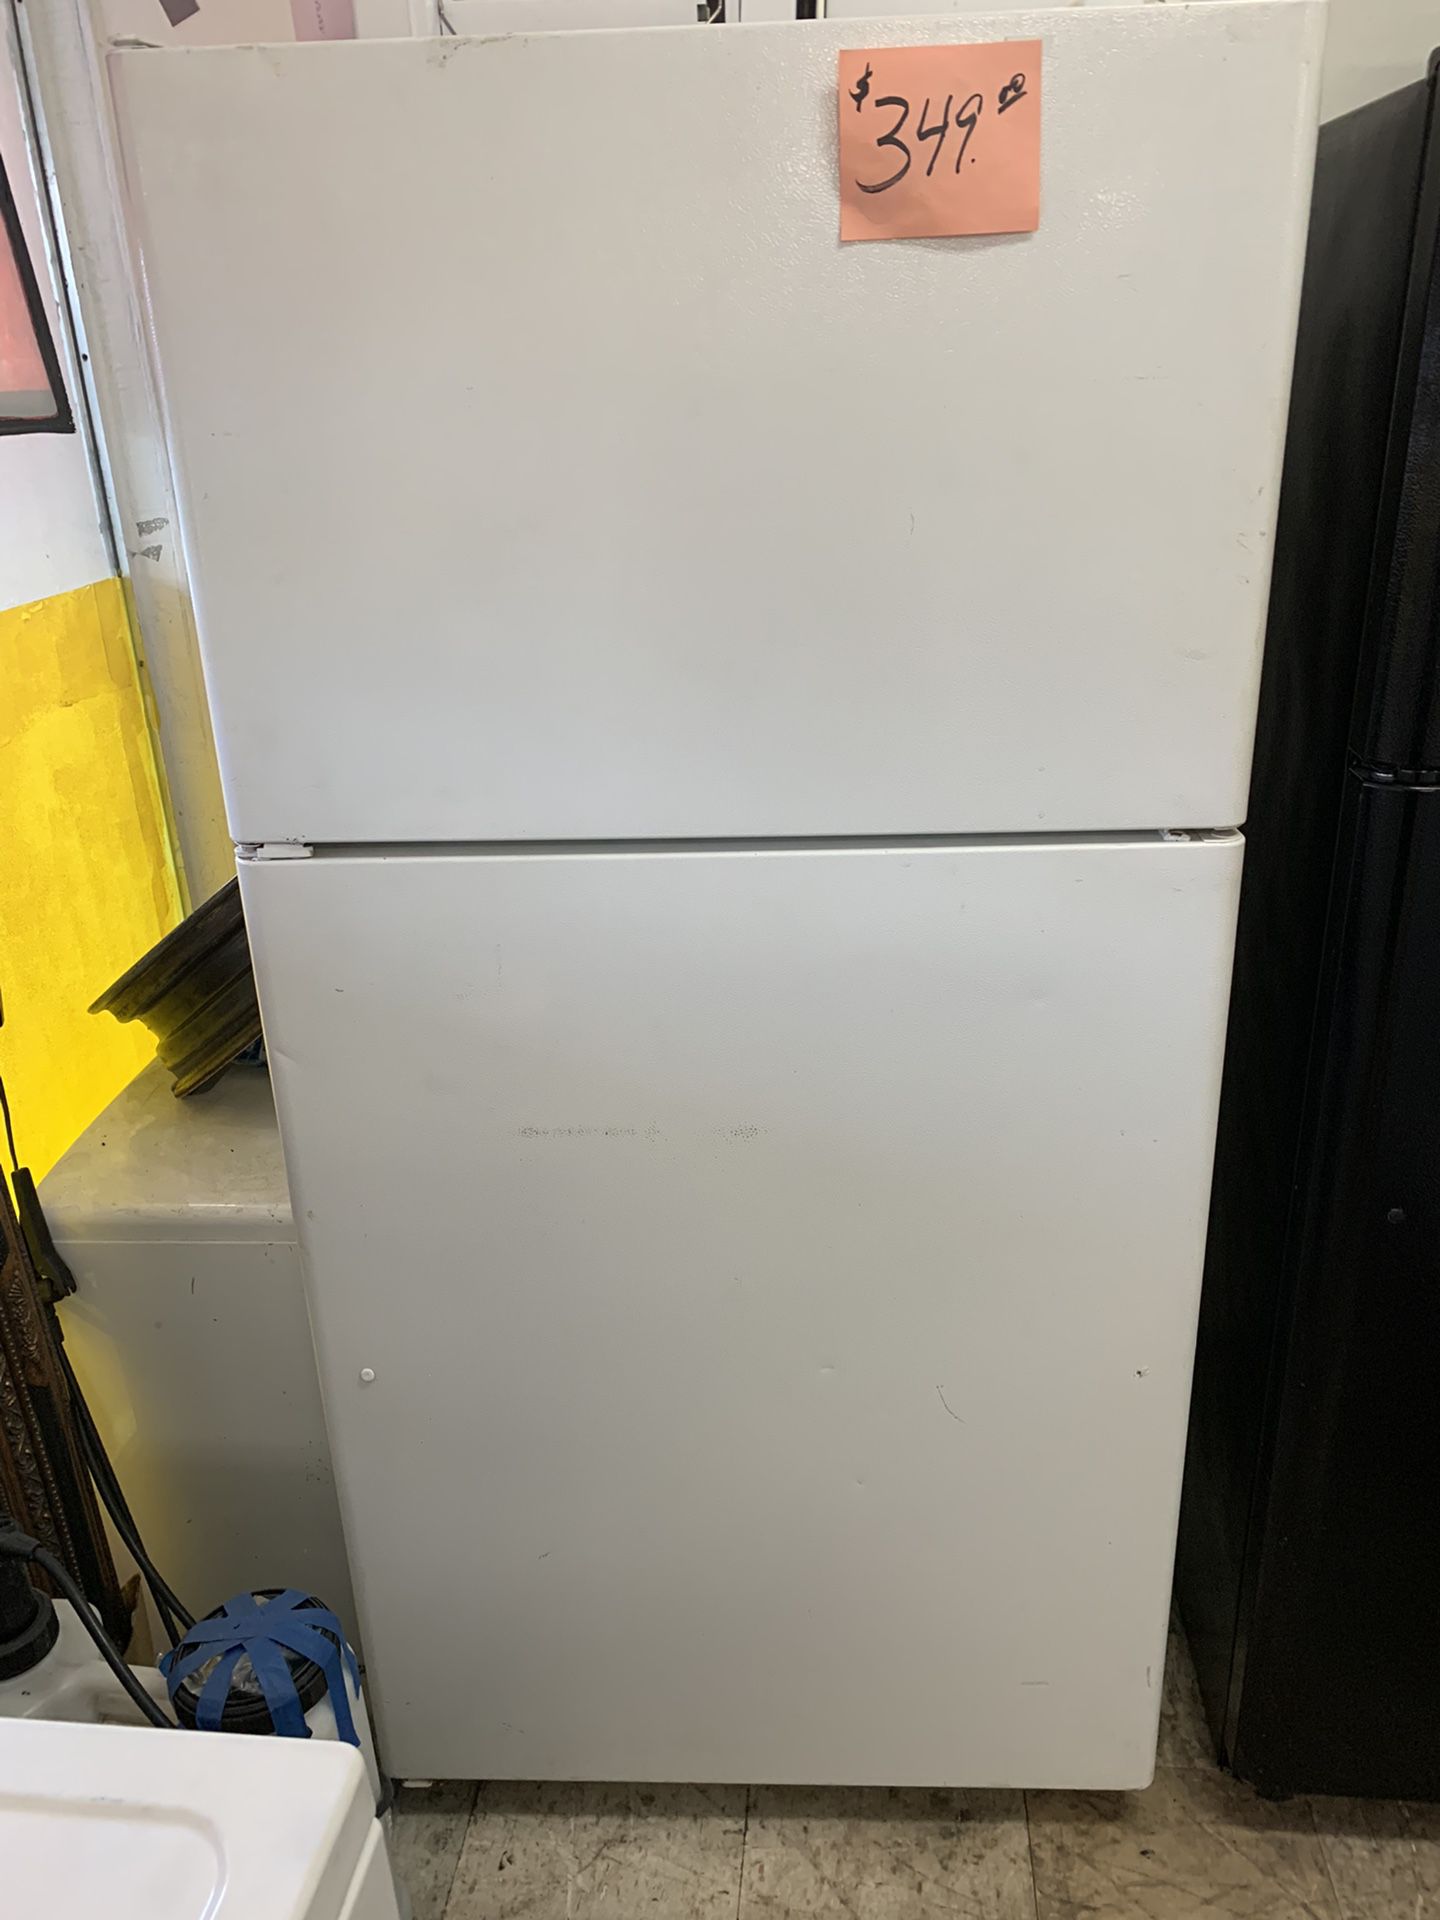 GE Refrigerator White Ex Large Excellent  .  Warranty  . Delivery Available . 2203 Fowler St. 33901